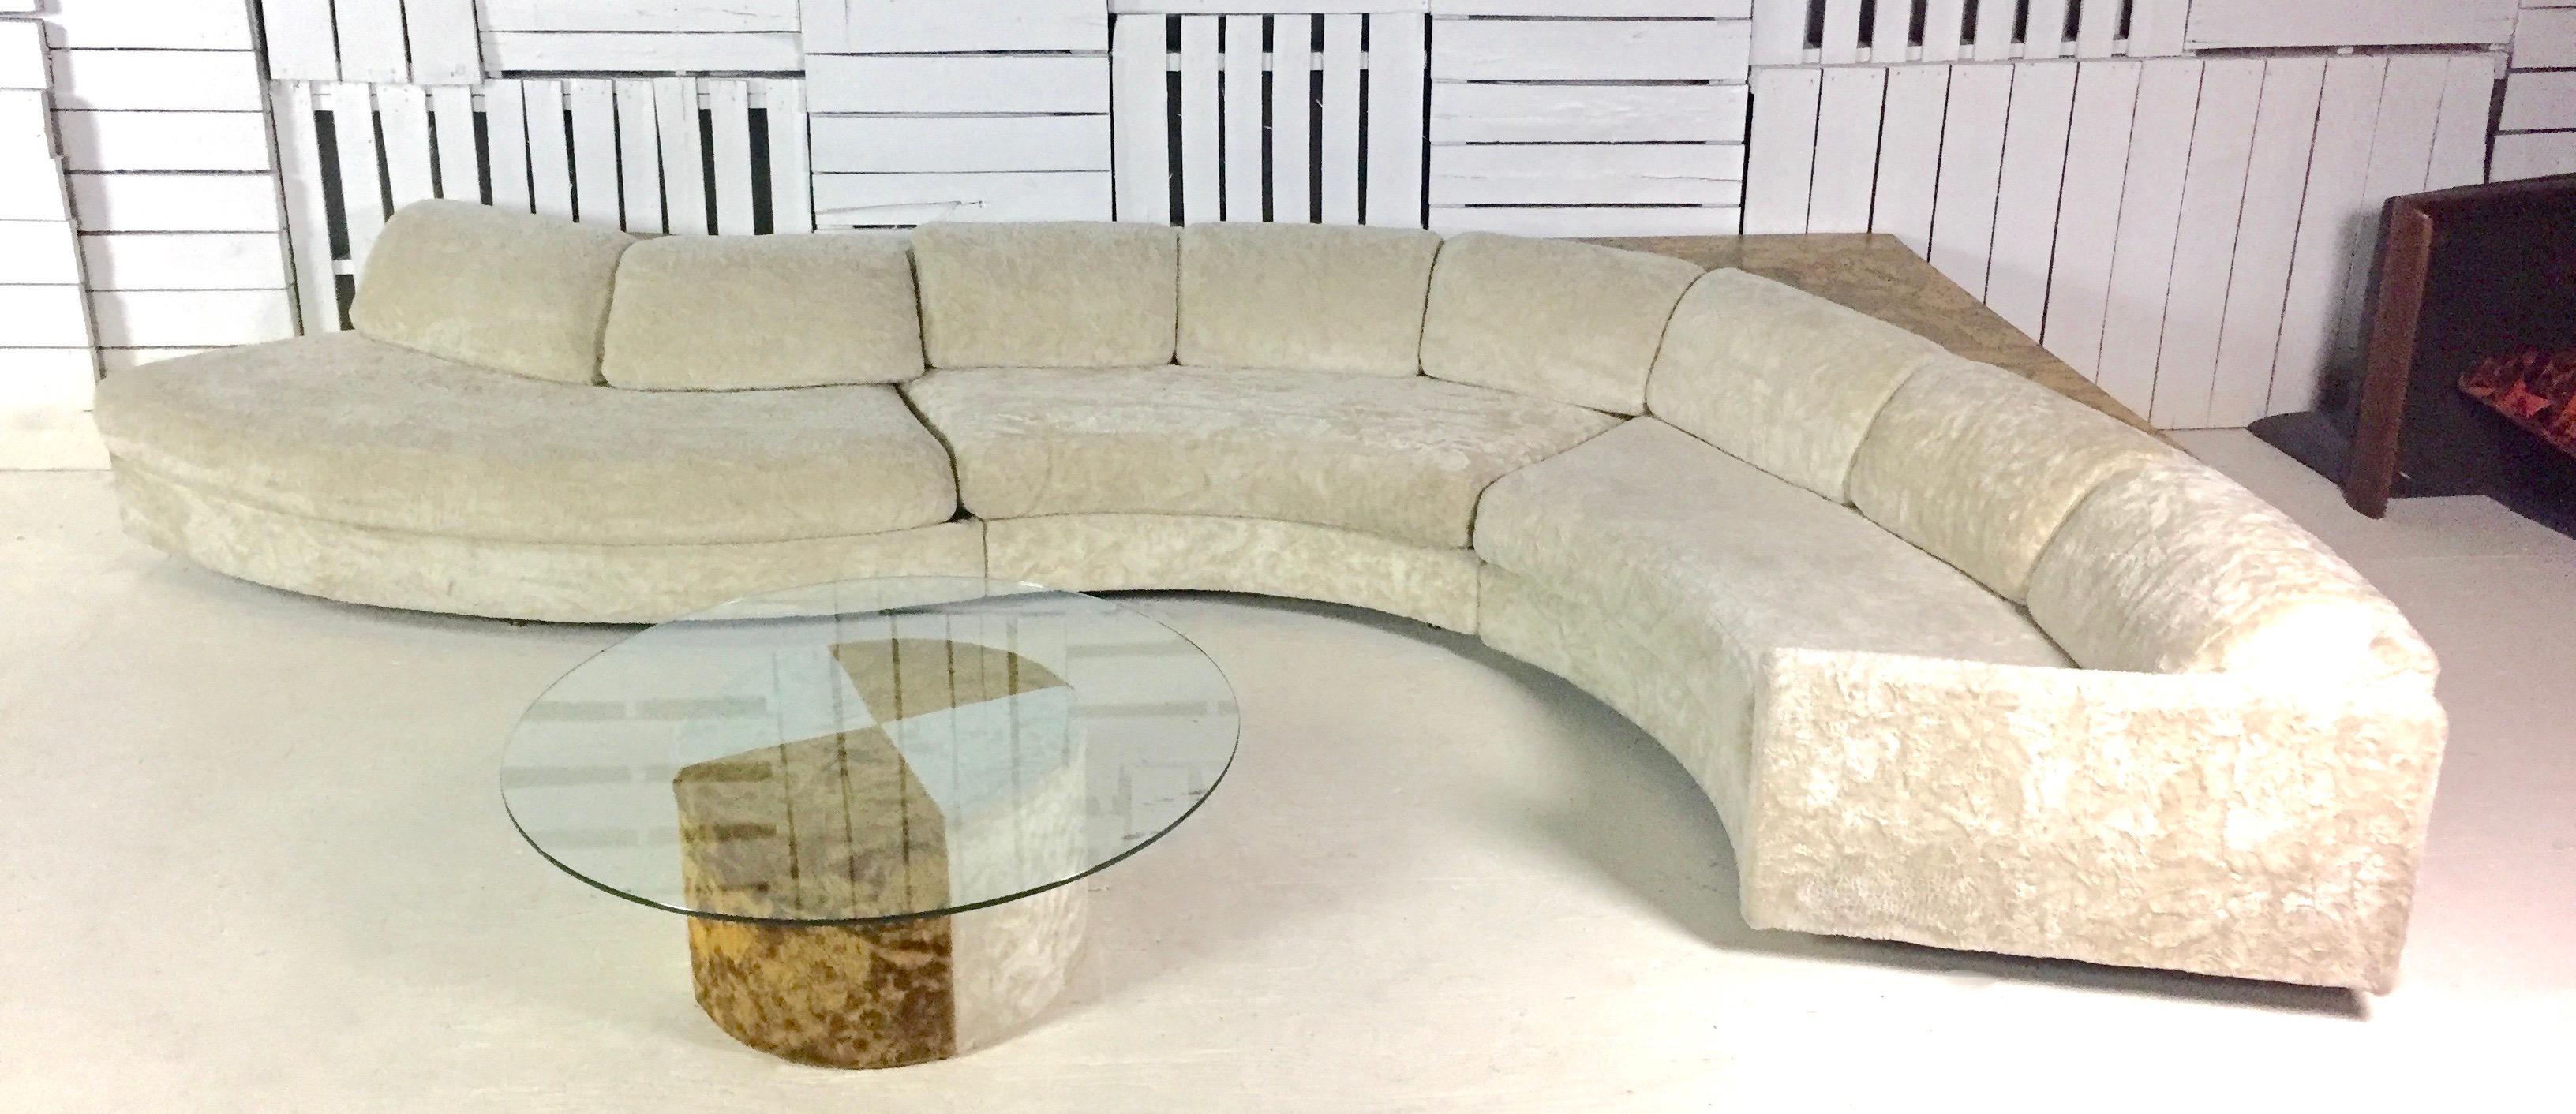 Authentic Adrian Pearsall sectionals are some of his most dramatic creations. They also need space! Please peruse our growing collection of rare Pearsall pieces which we will be listing this month.

Adrian Pearsall three piece serpentine sectional